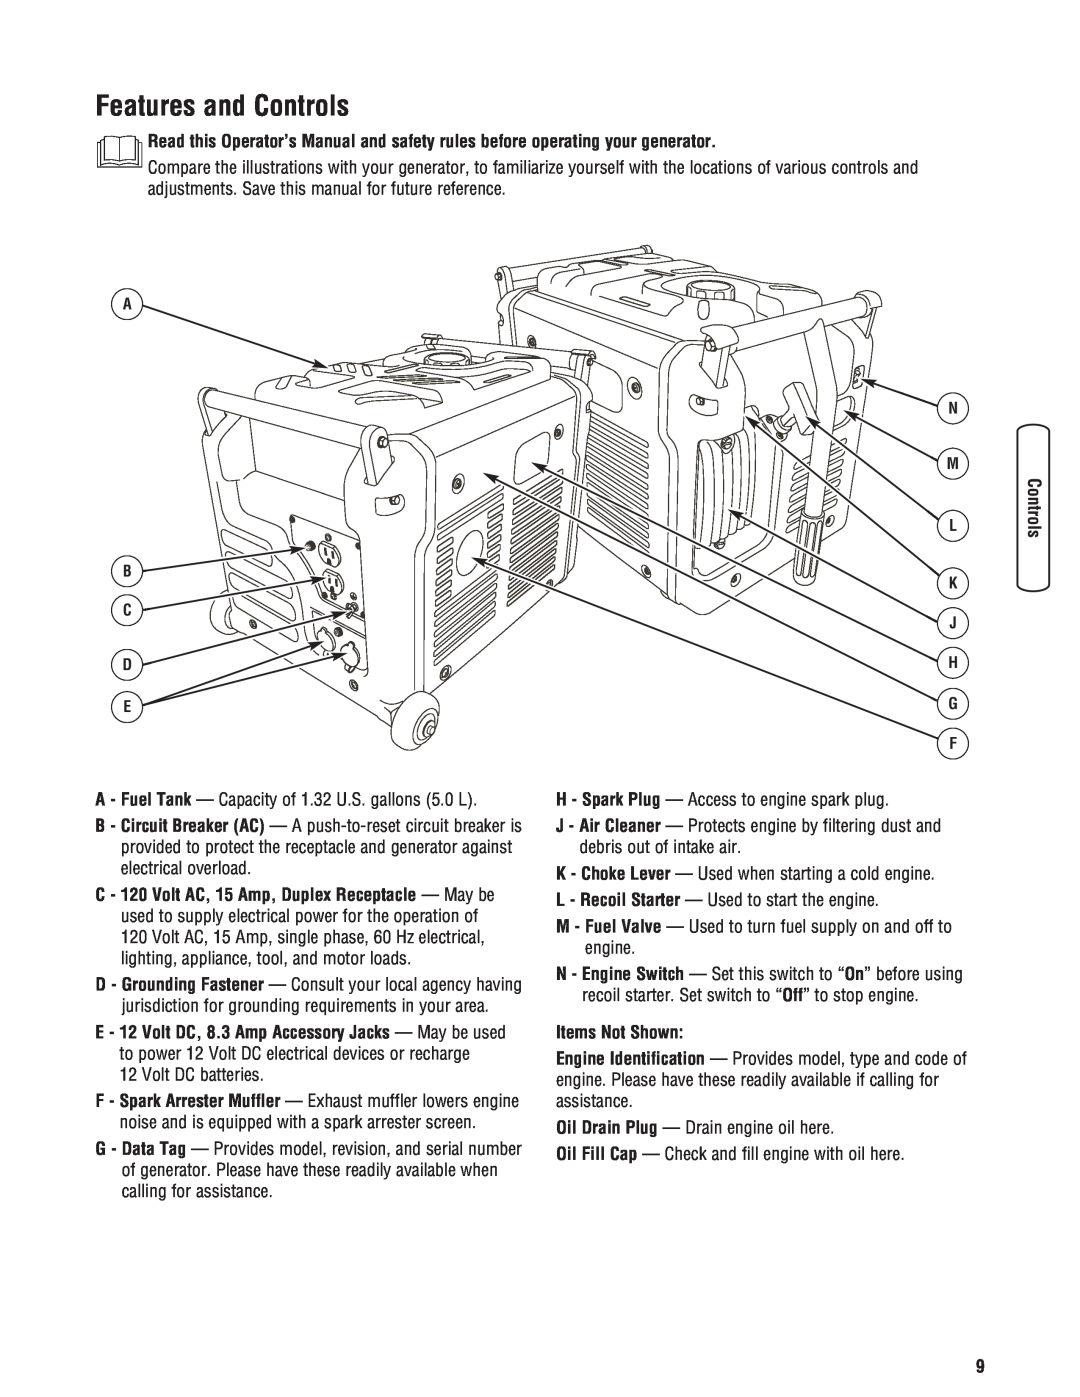 Husqvarna 420 GN manual Features and Controls, Items Not Shown 